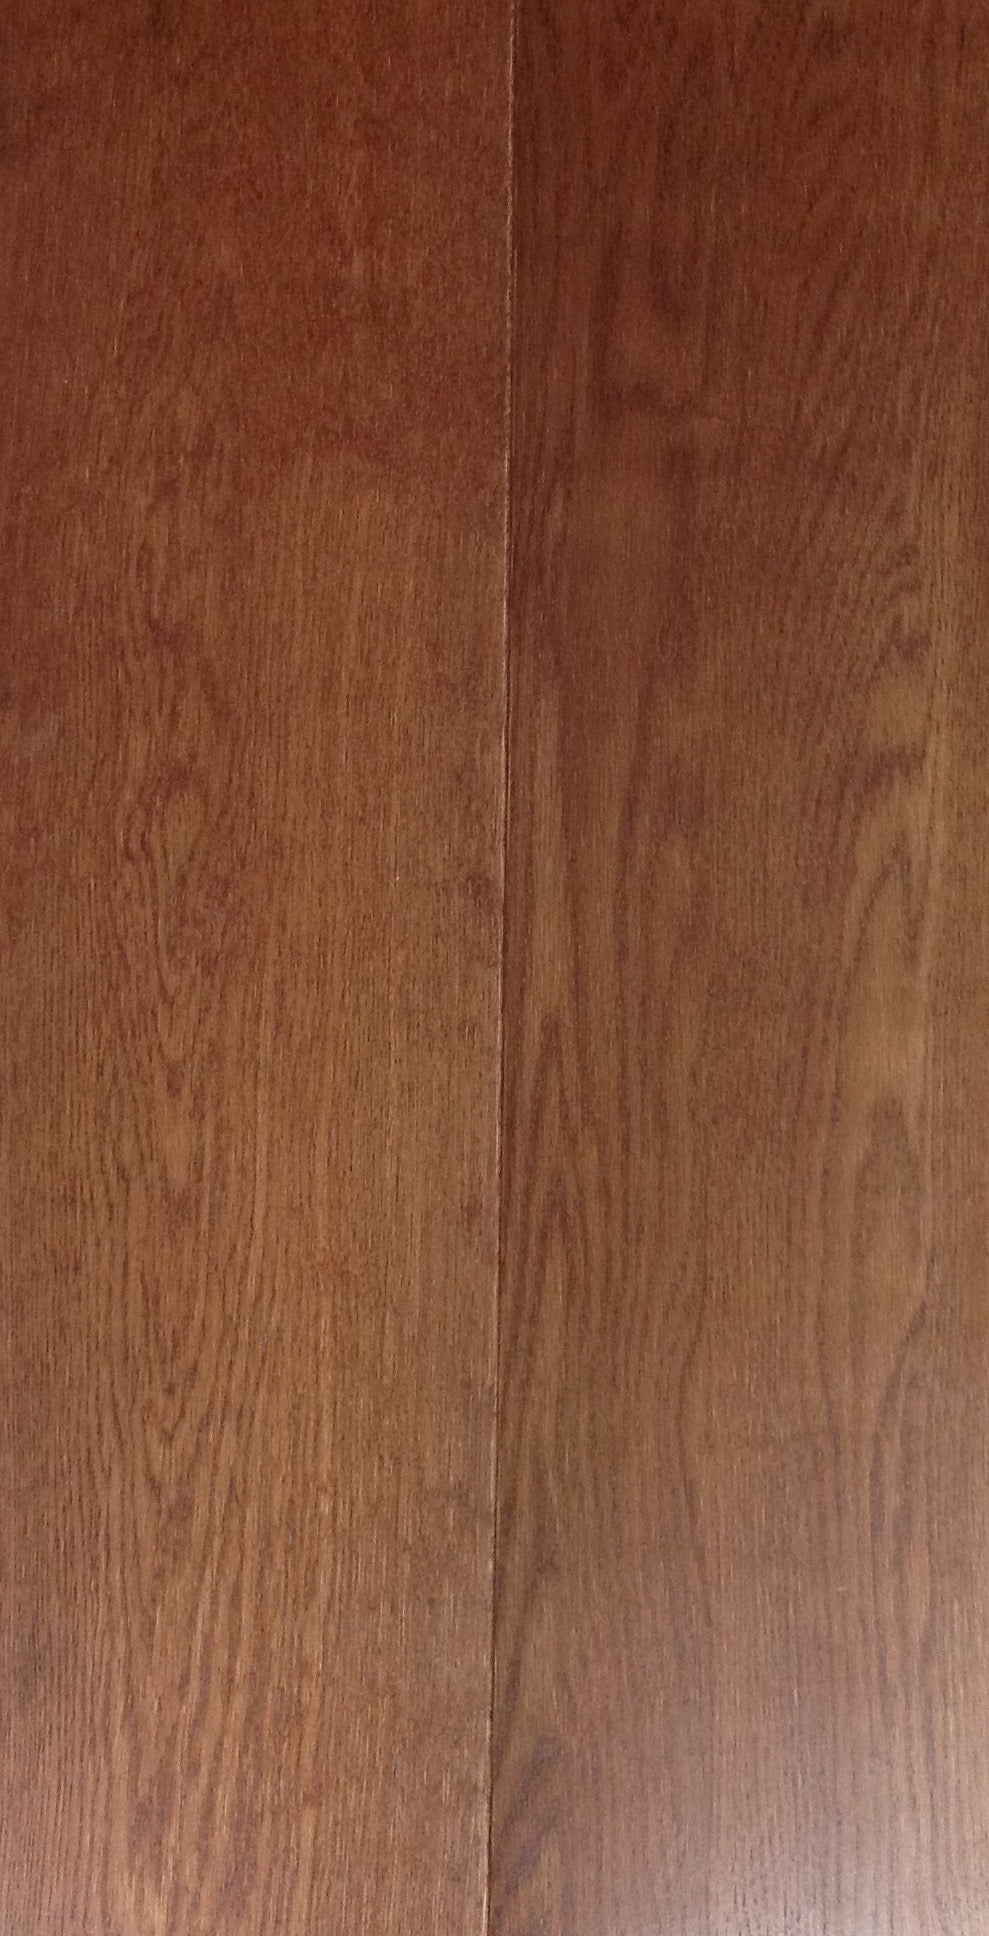 Old walnut Flooring “St James Collection”